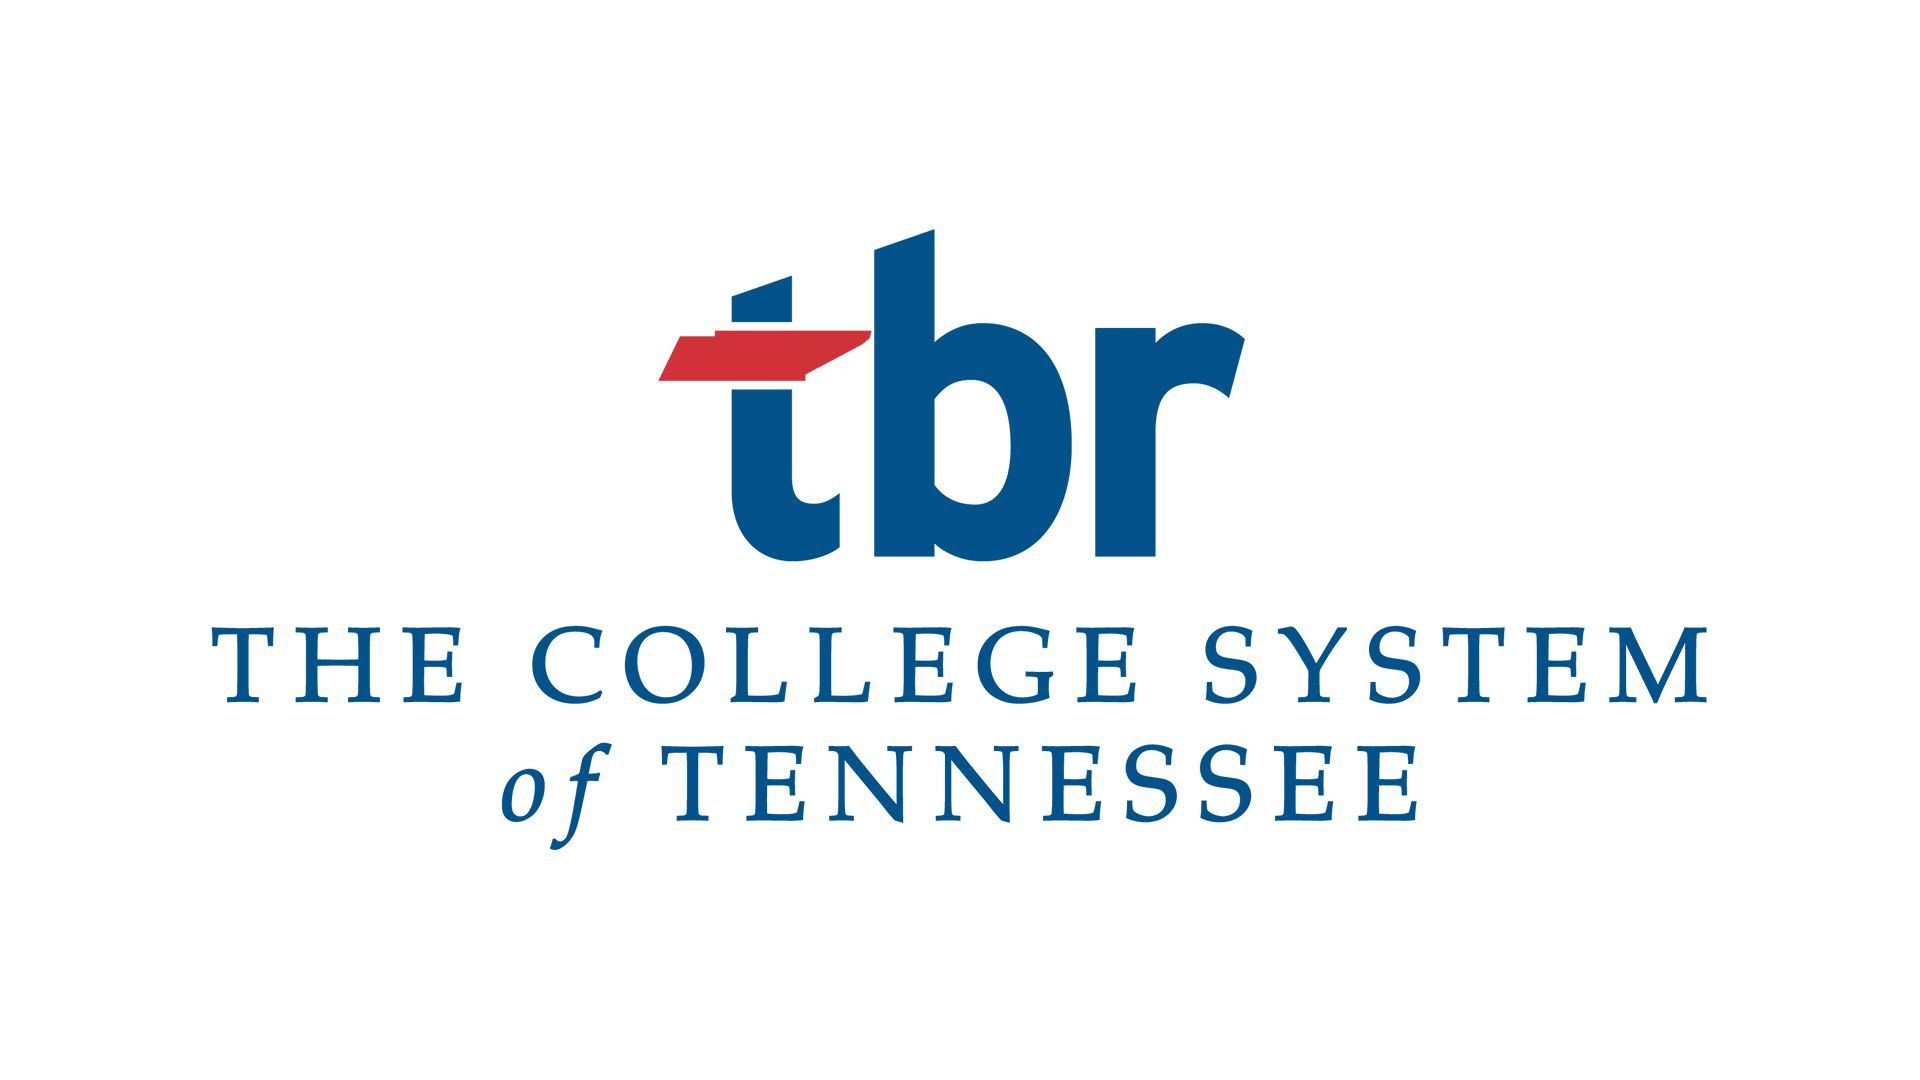 The logo of the college system of Tennessee